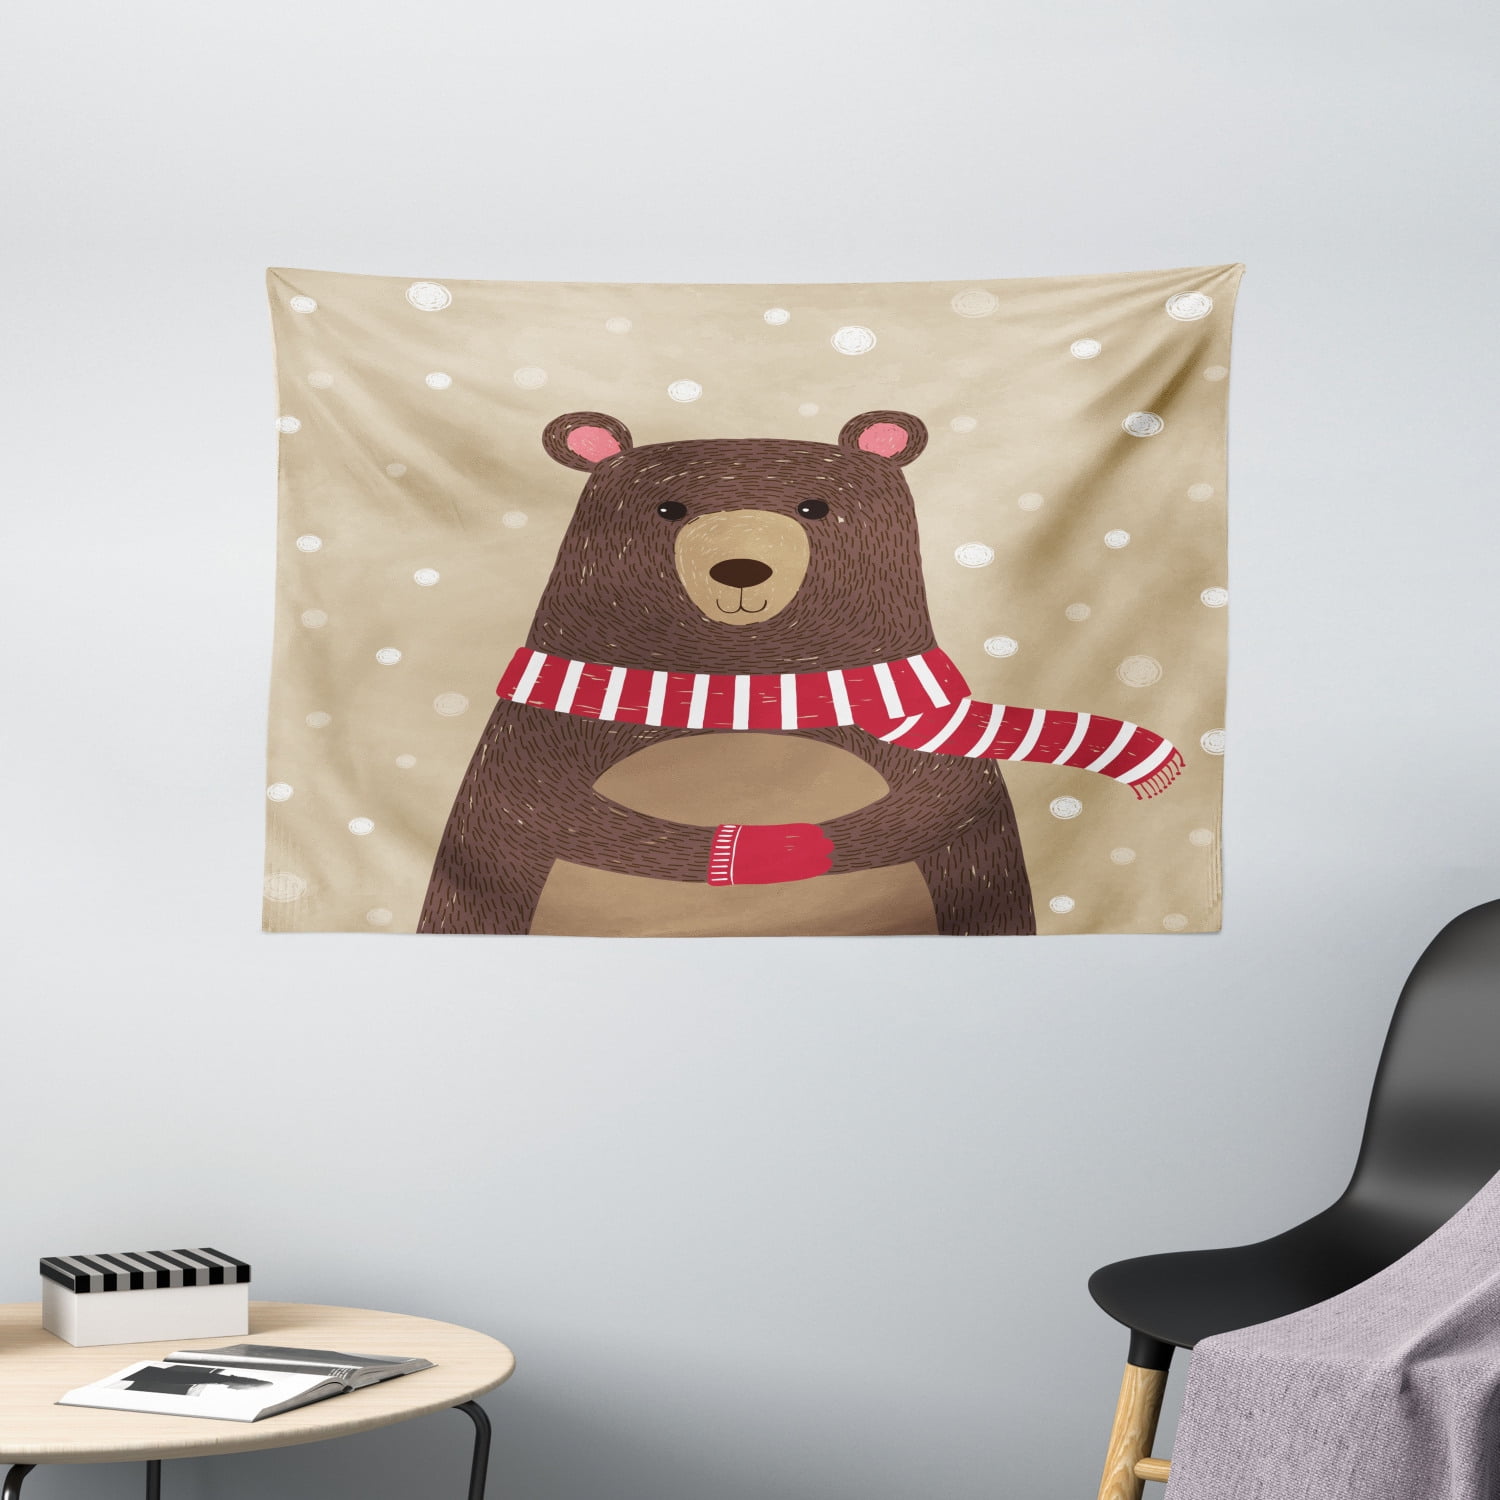 8 x 12 Carolines Treasures Teddy Bear on The Beach Wall or Door Hanging Prints APH0088DS812 Multicolor